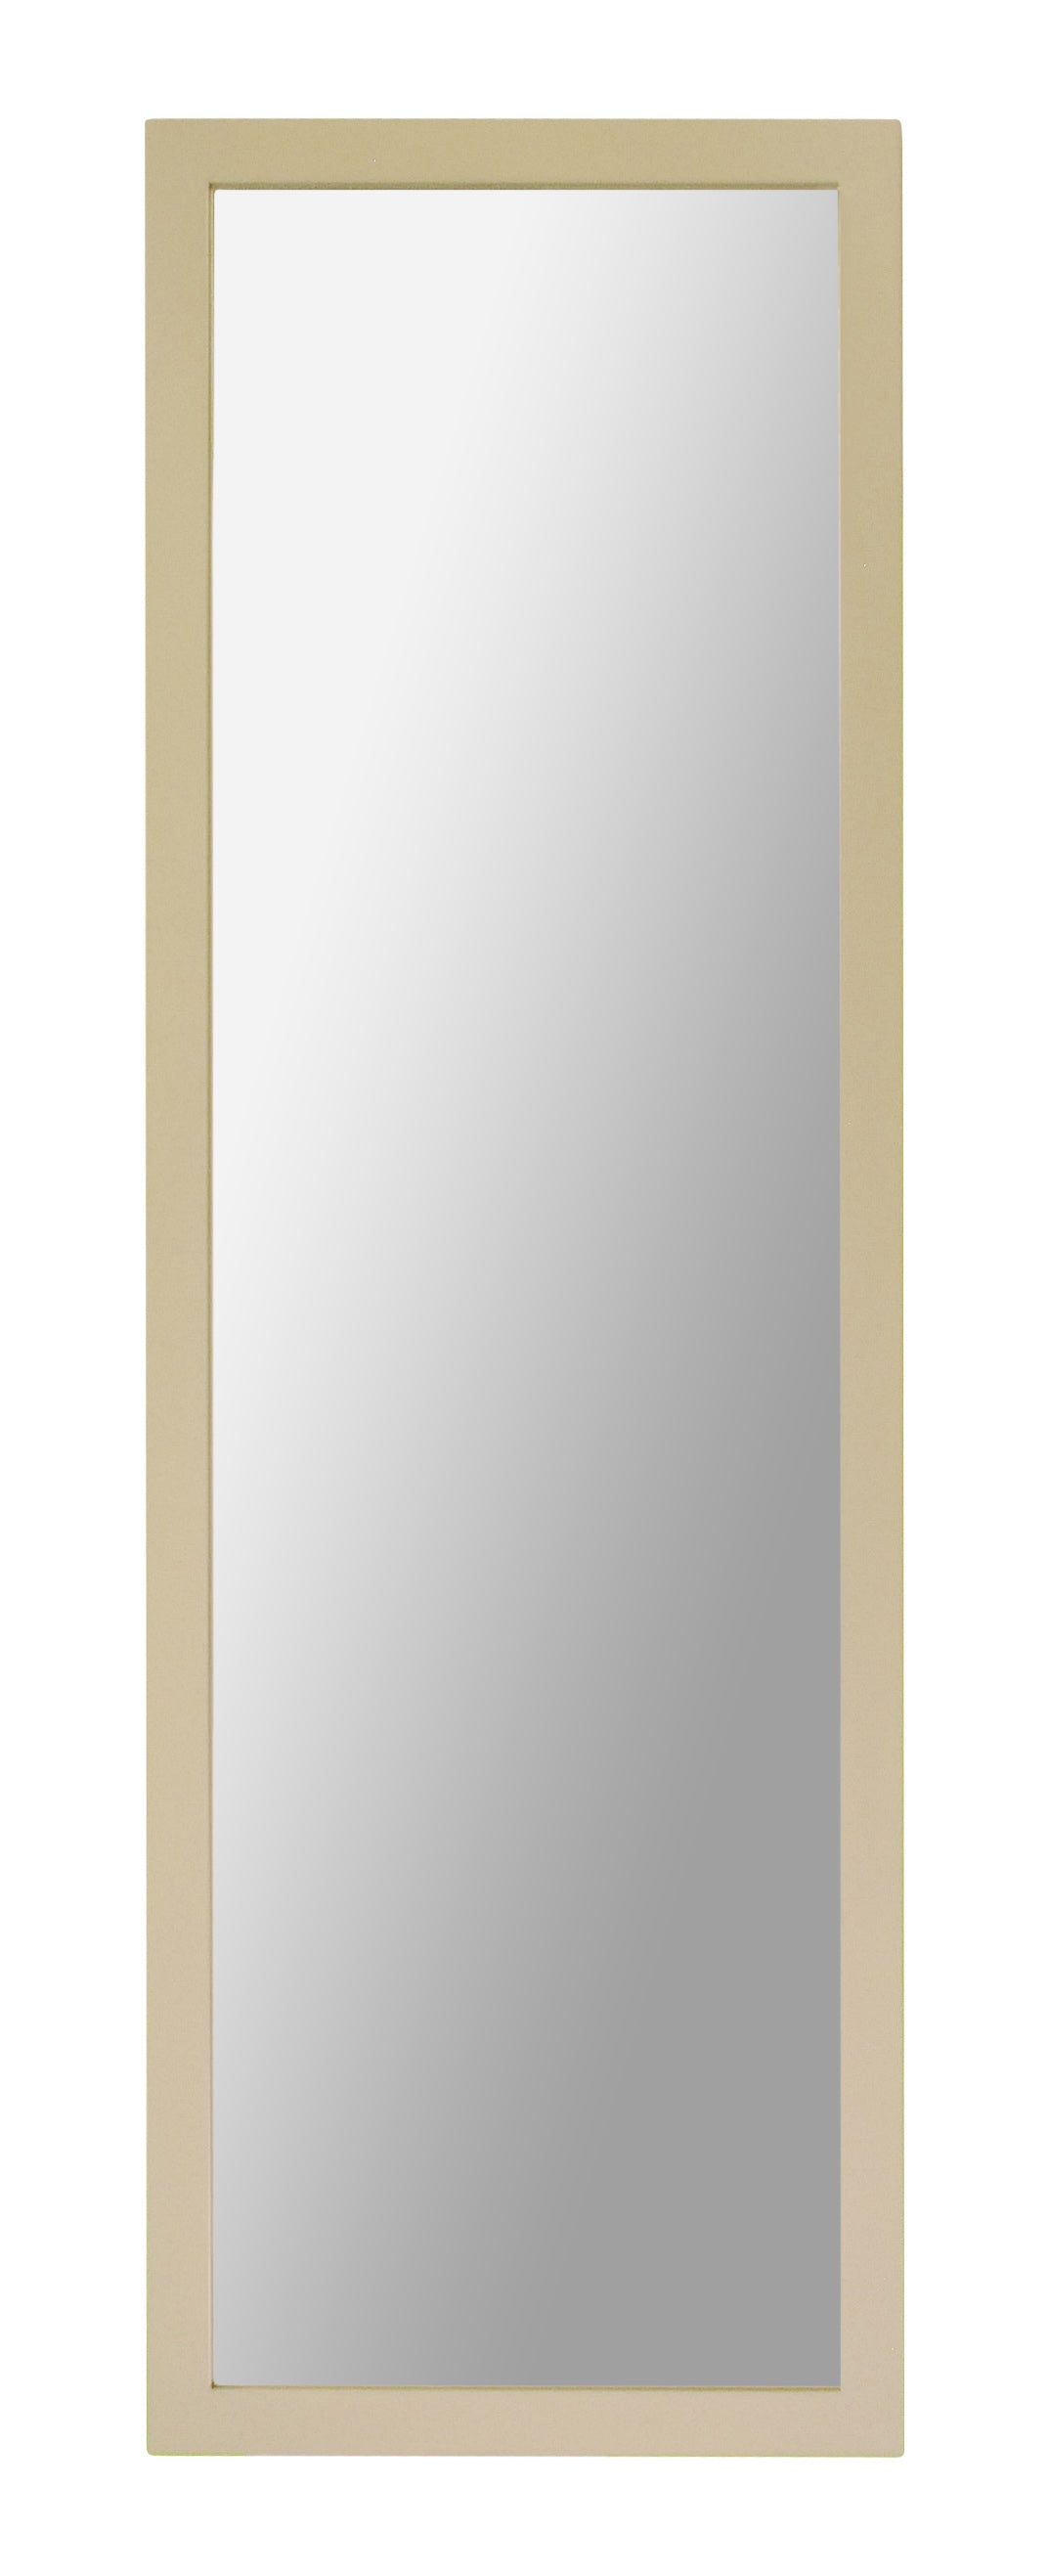 Full-Height Mirror with Wood Frame and custom-made finish.